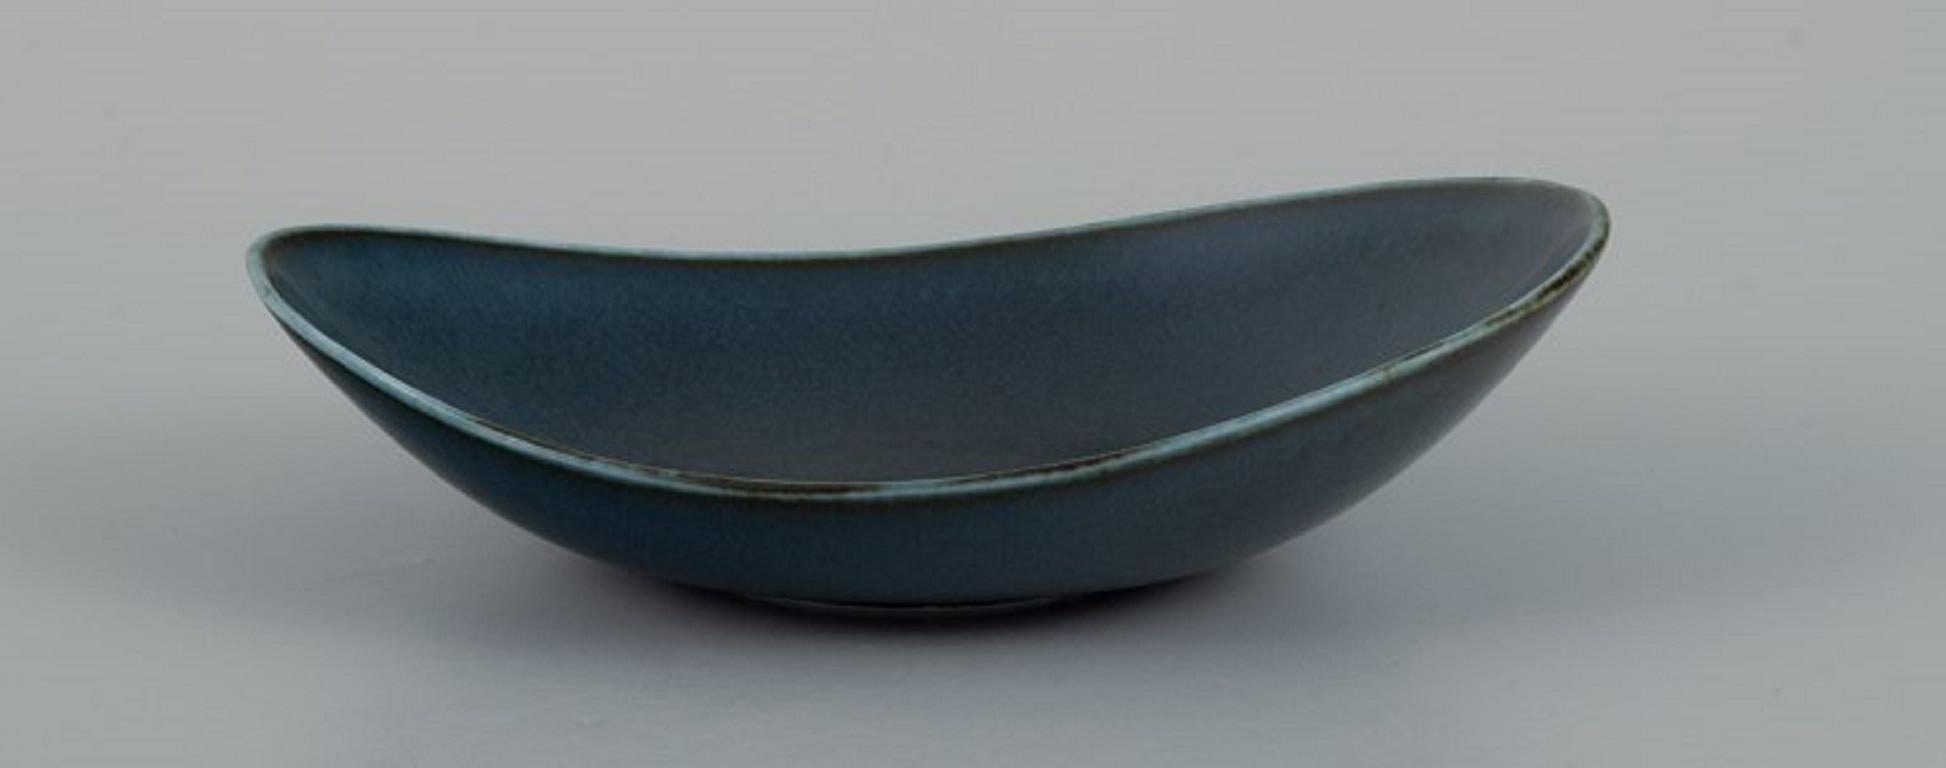 Carl Harry Stålhane for Rörstrand, Sweden.
Large bowl with glaze in dark blue shade.
Mid-20th century.
First factory quality.
In excellent condition.
Marked.
Measures: L 19.0 x H 4.0 cm.
  